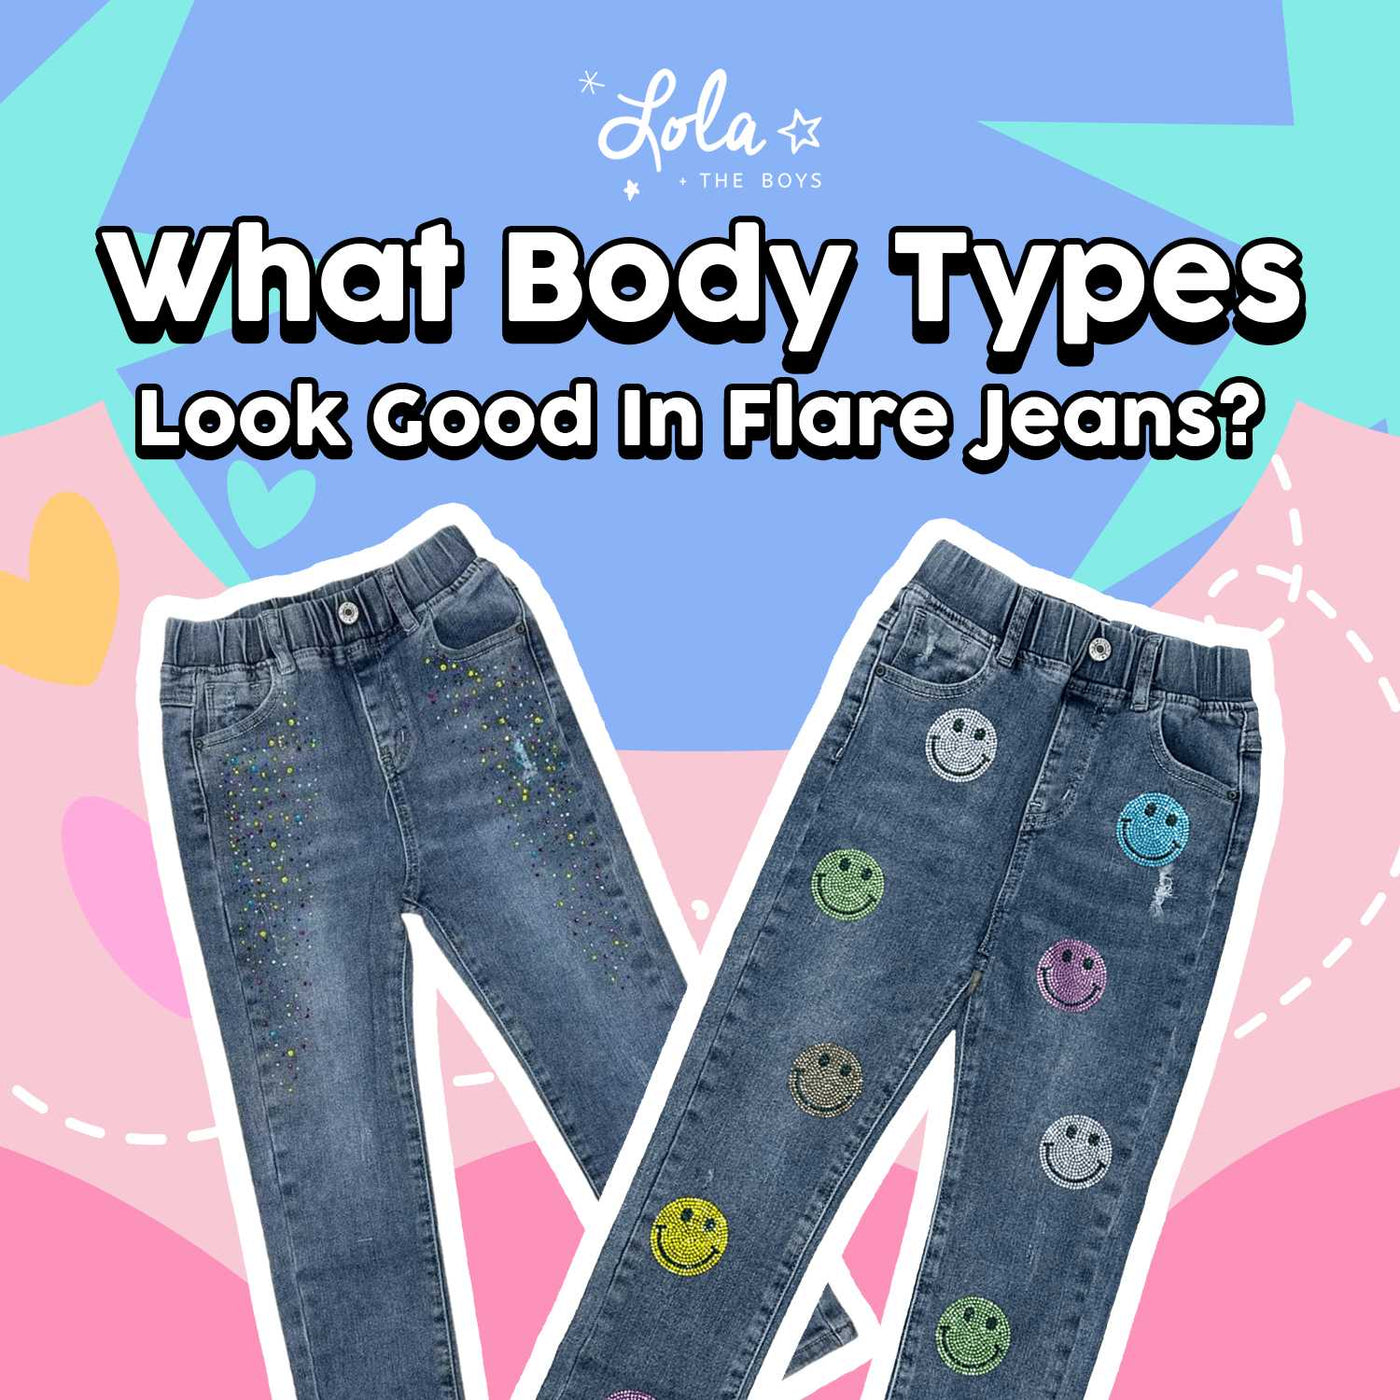 They're All Wearing: Cropped Flare Jeans » STEAL THE LOOK